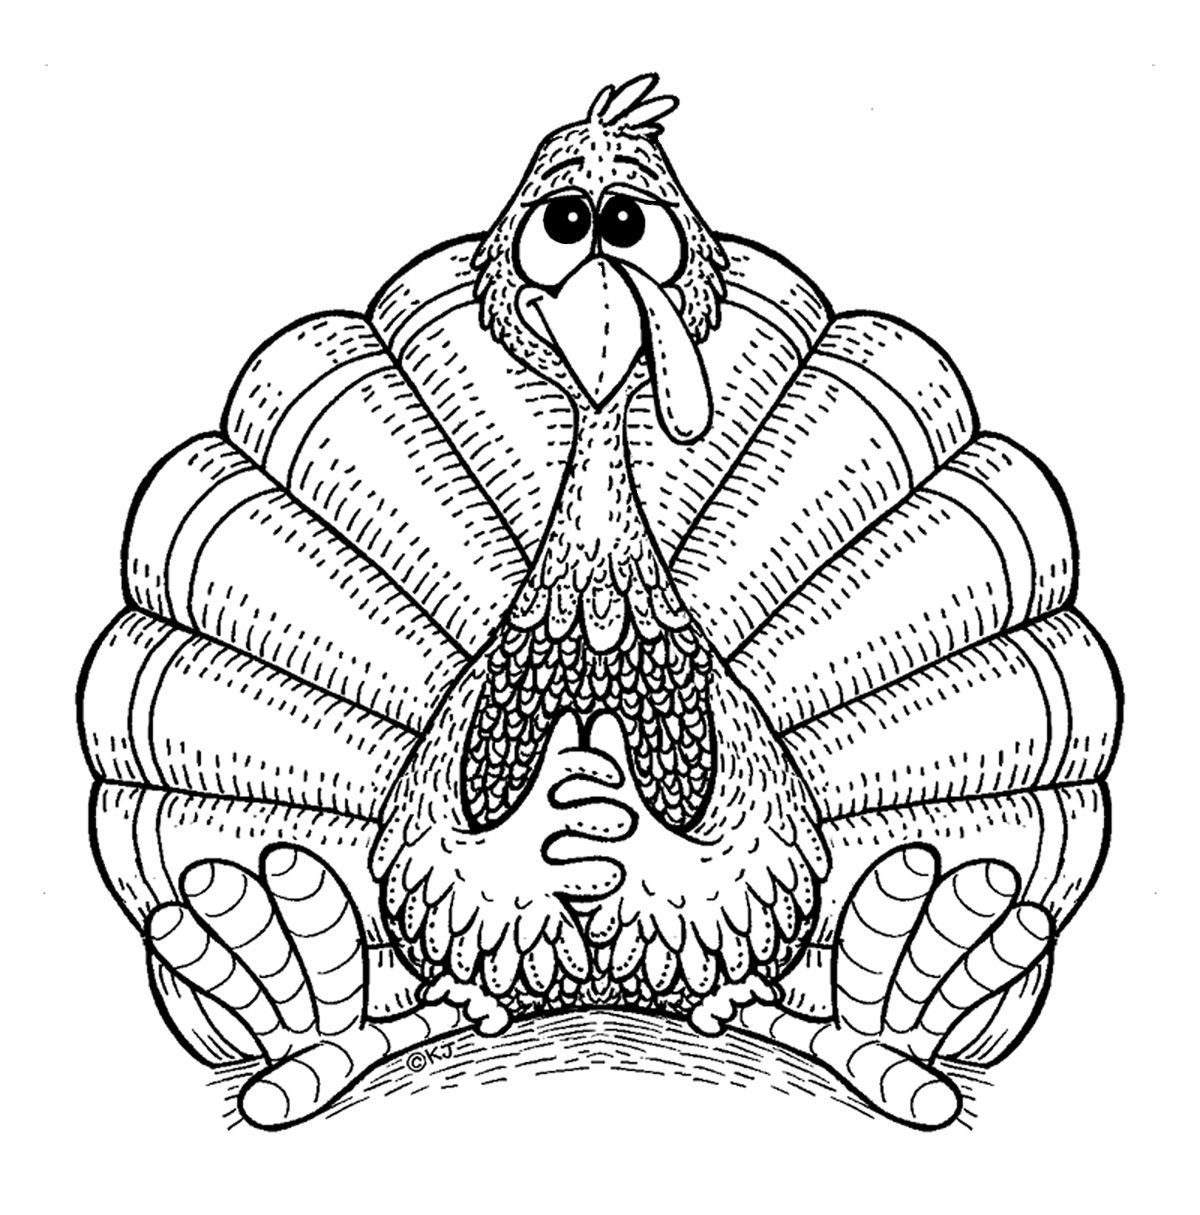 Thanksgiving Adult Coloring Pages
 Giving Thanks